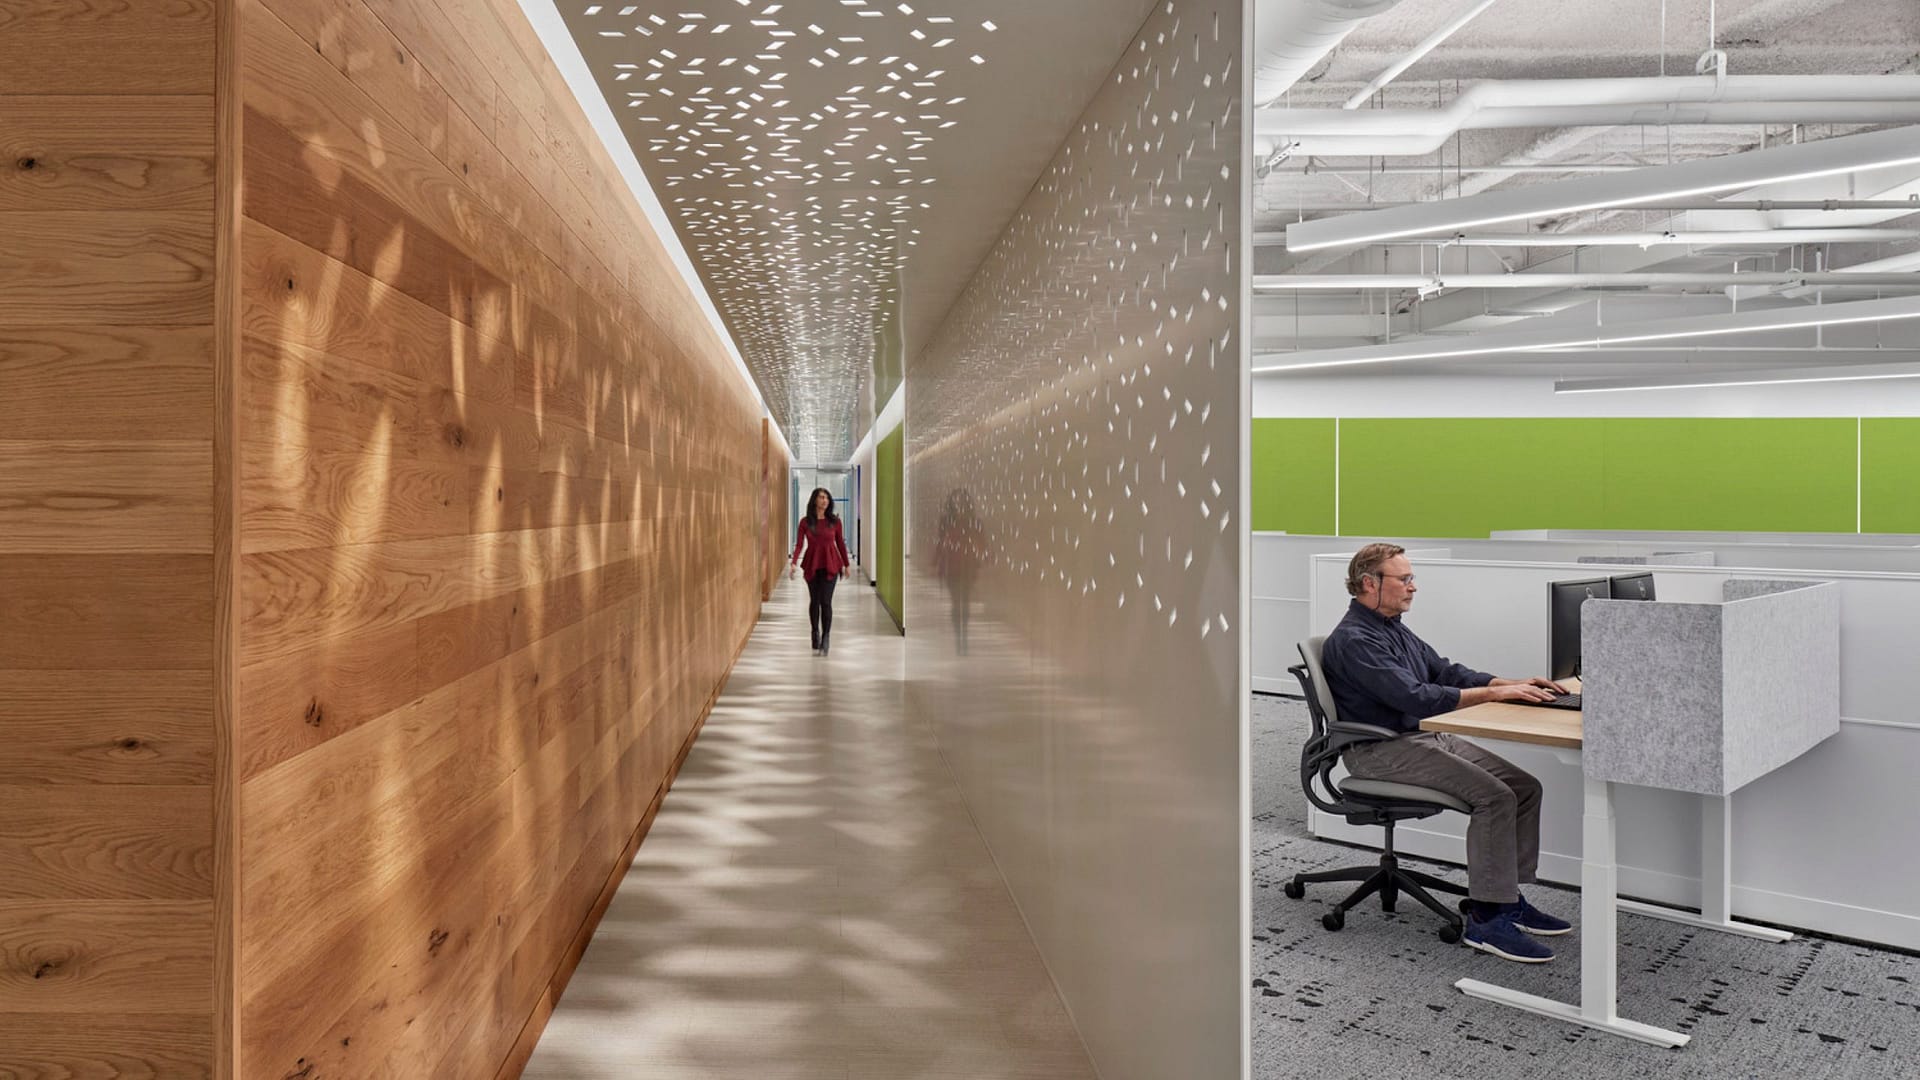 A hallway with perforated partitions at the Verisk Boston offices.